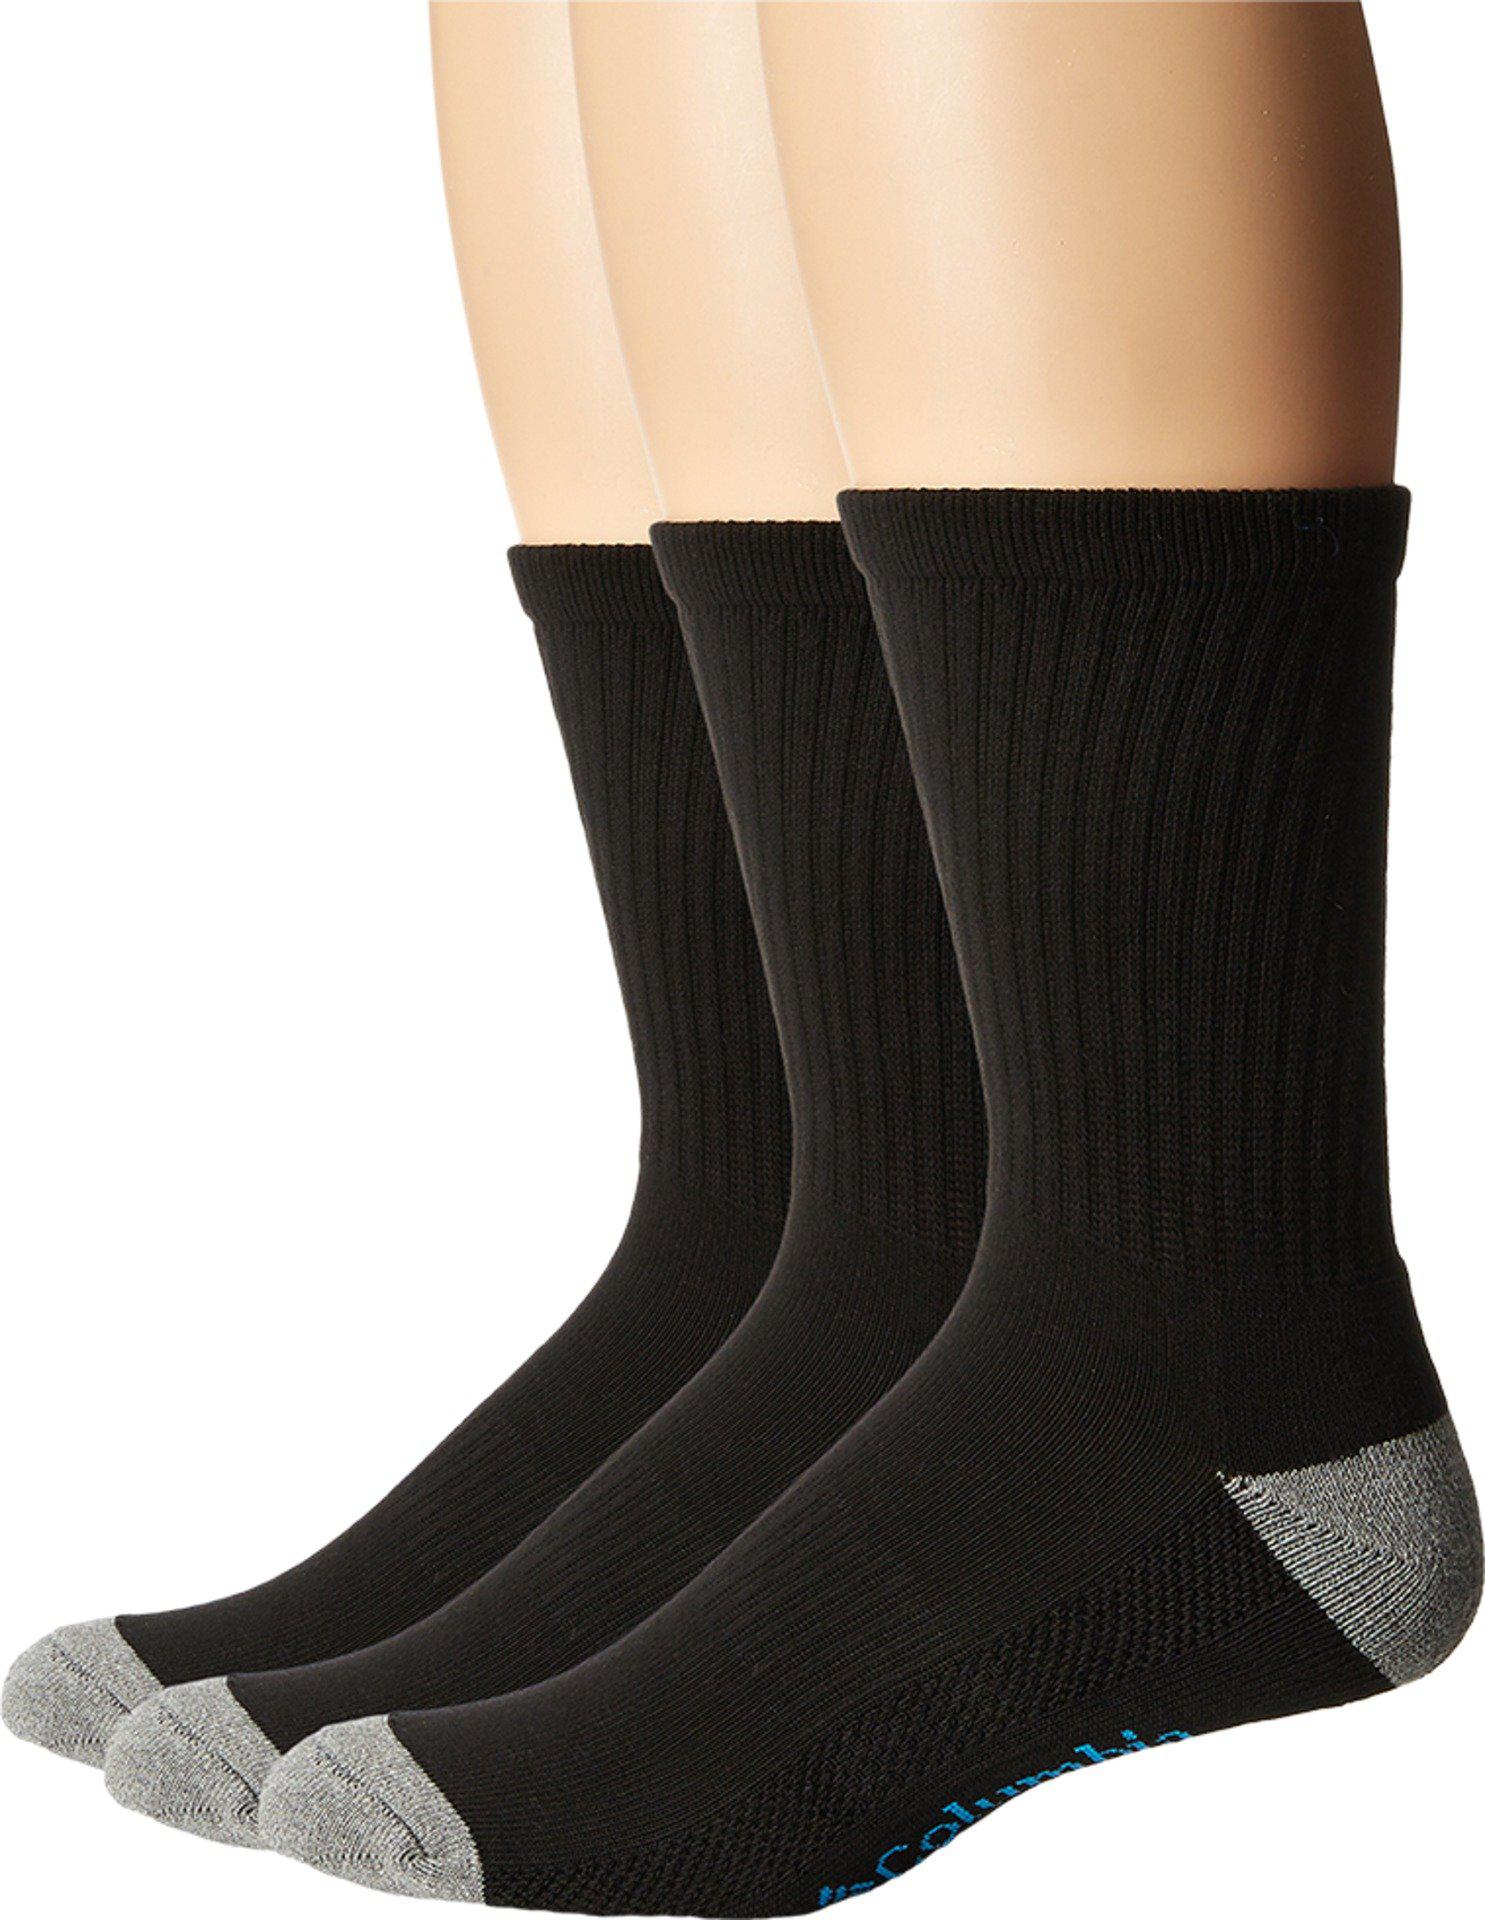 Columbia Cotton Crew Athletic Socks 3-pack in Black for Men - Lyst